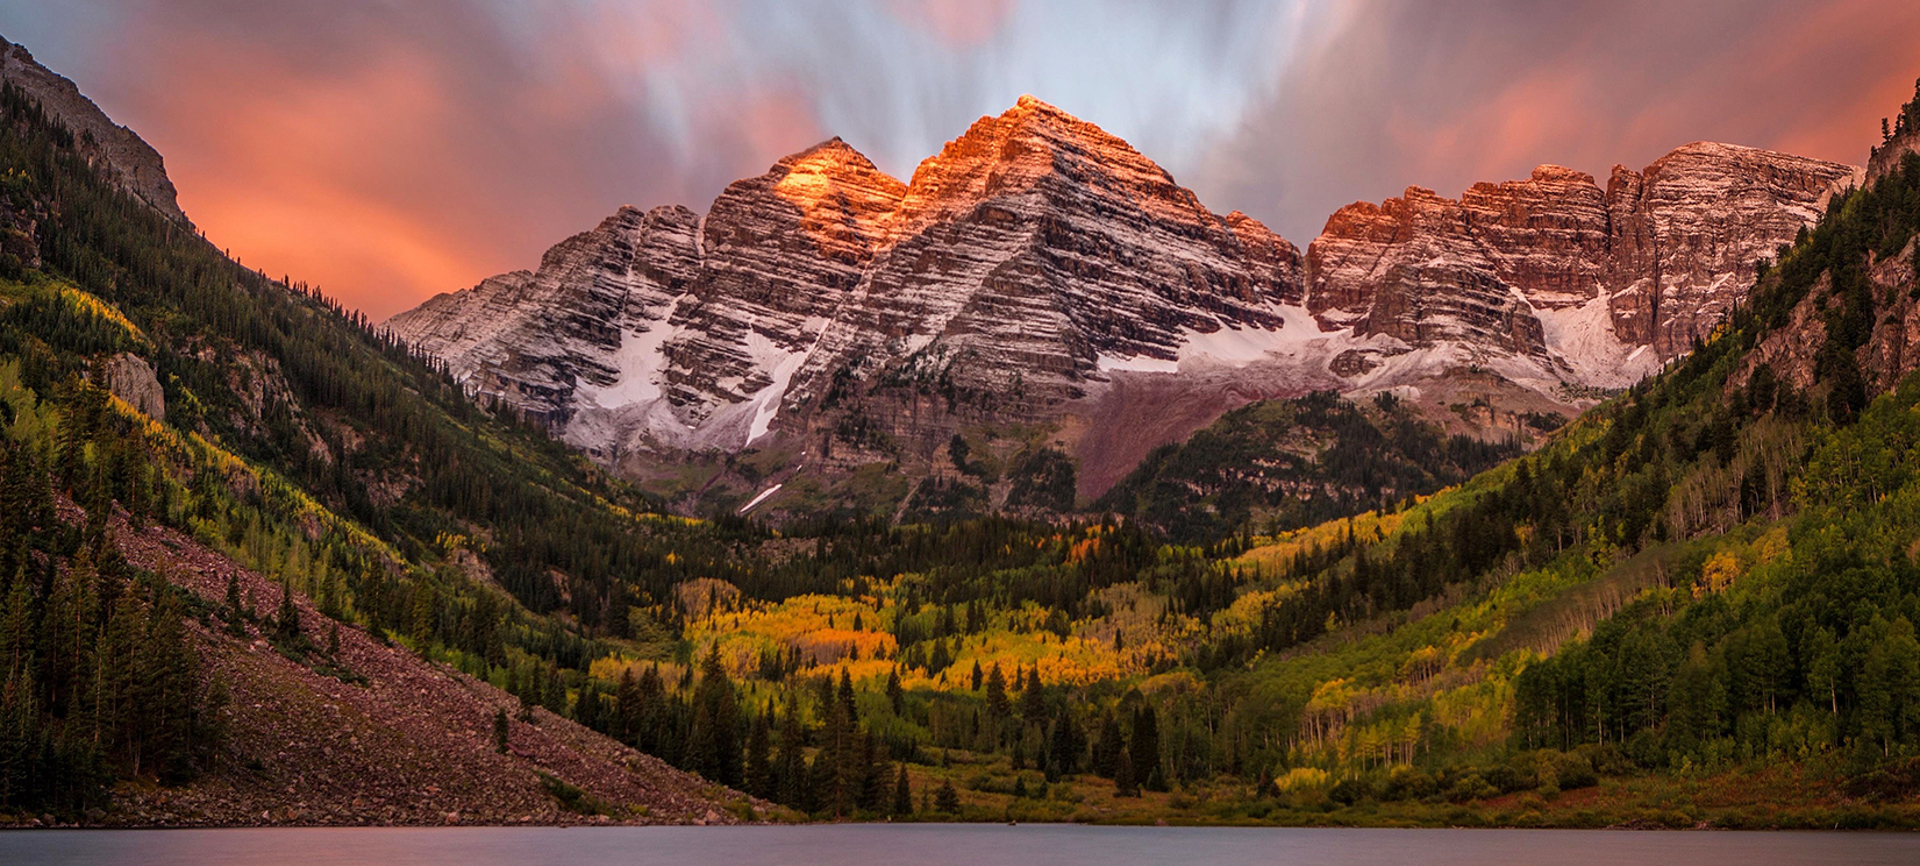 Early fall sunset in Maroon Bells valley.